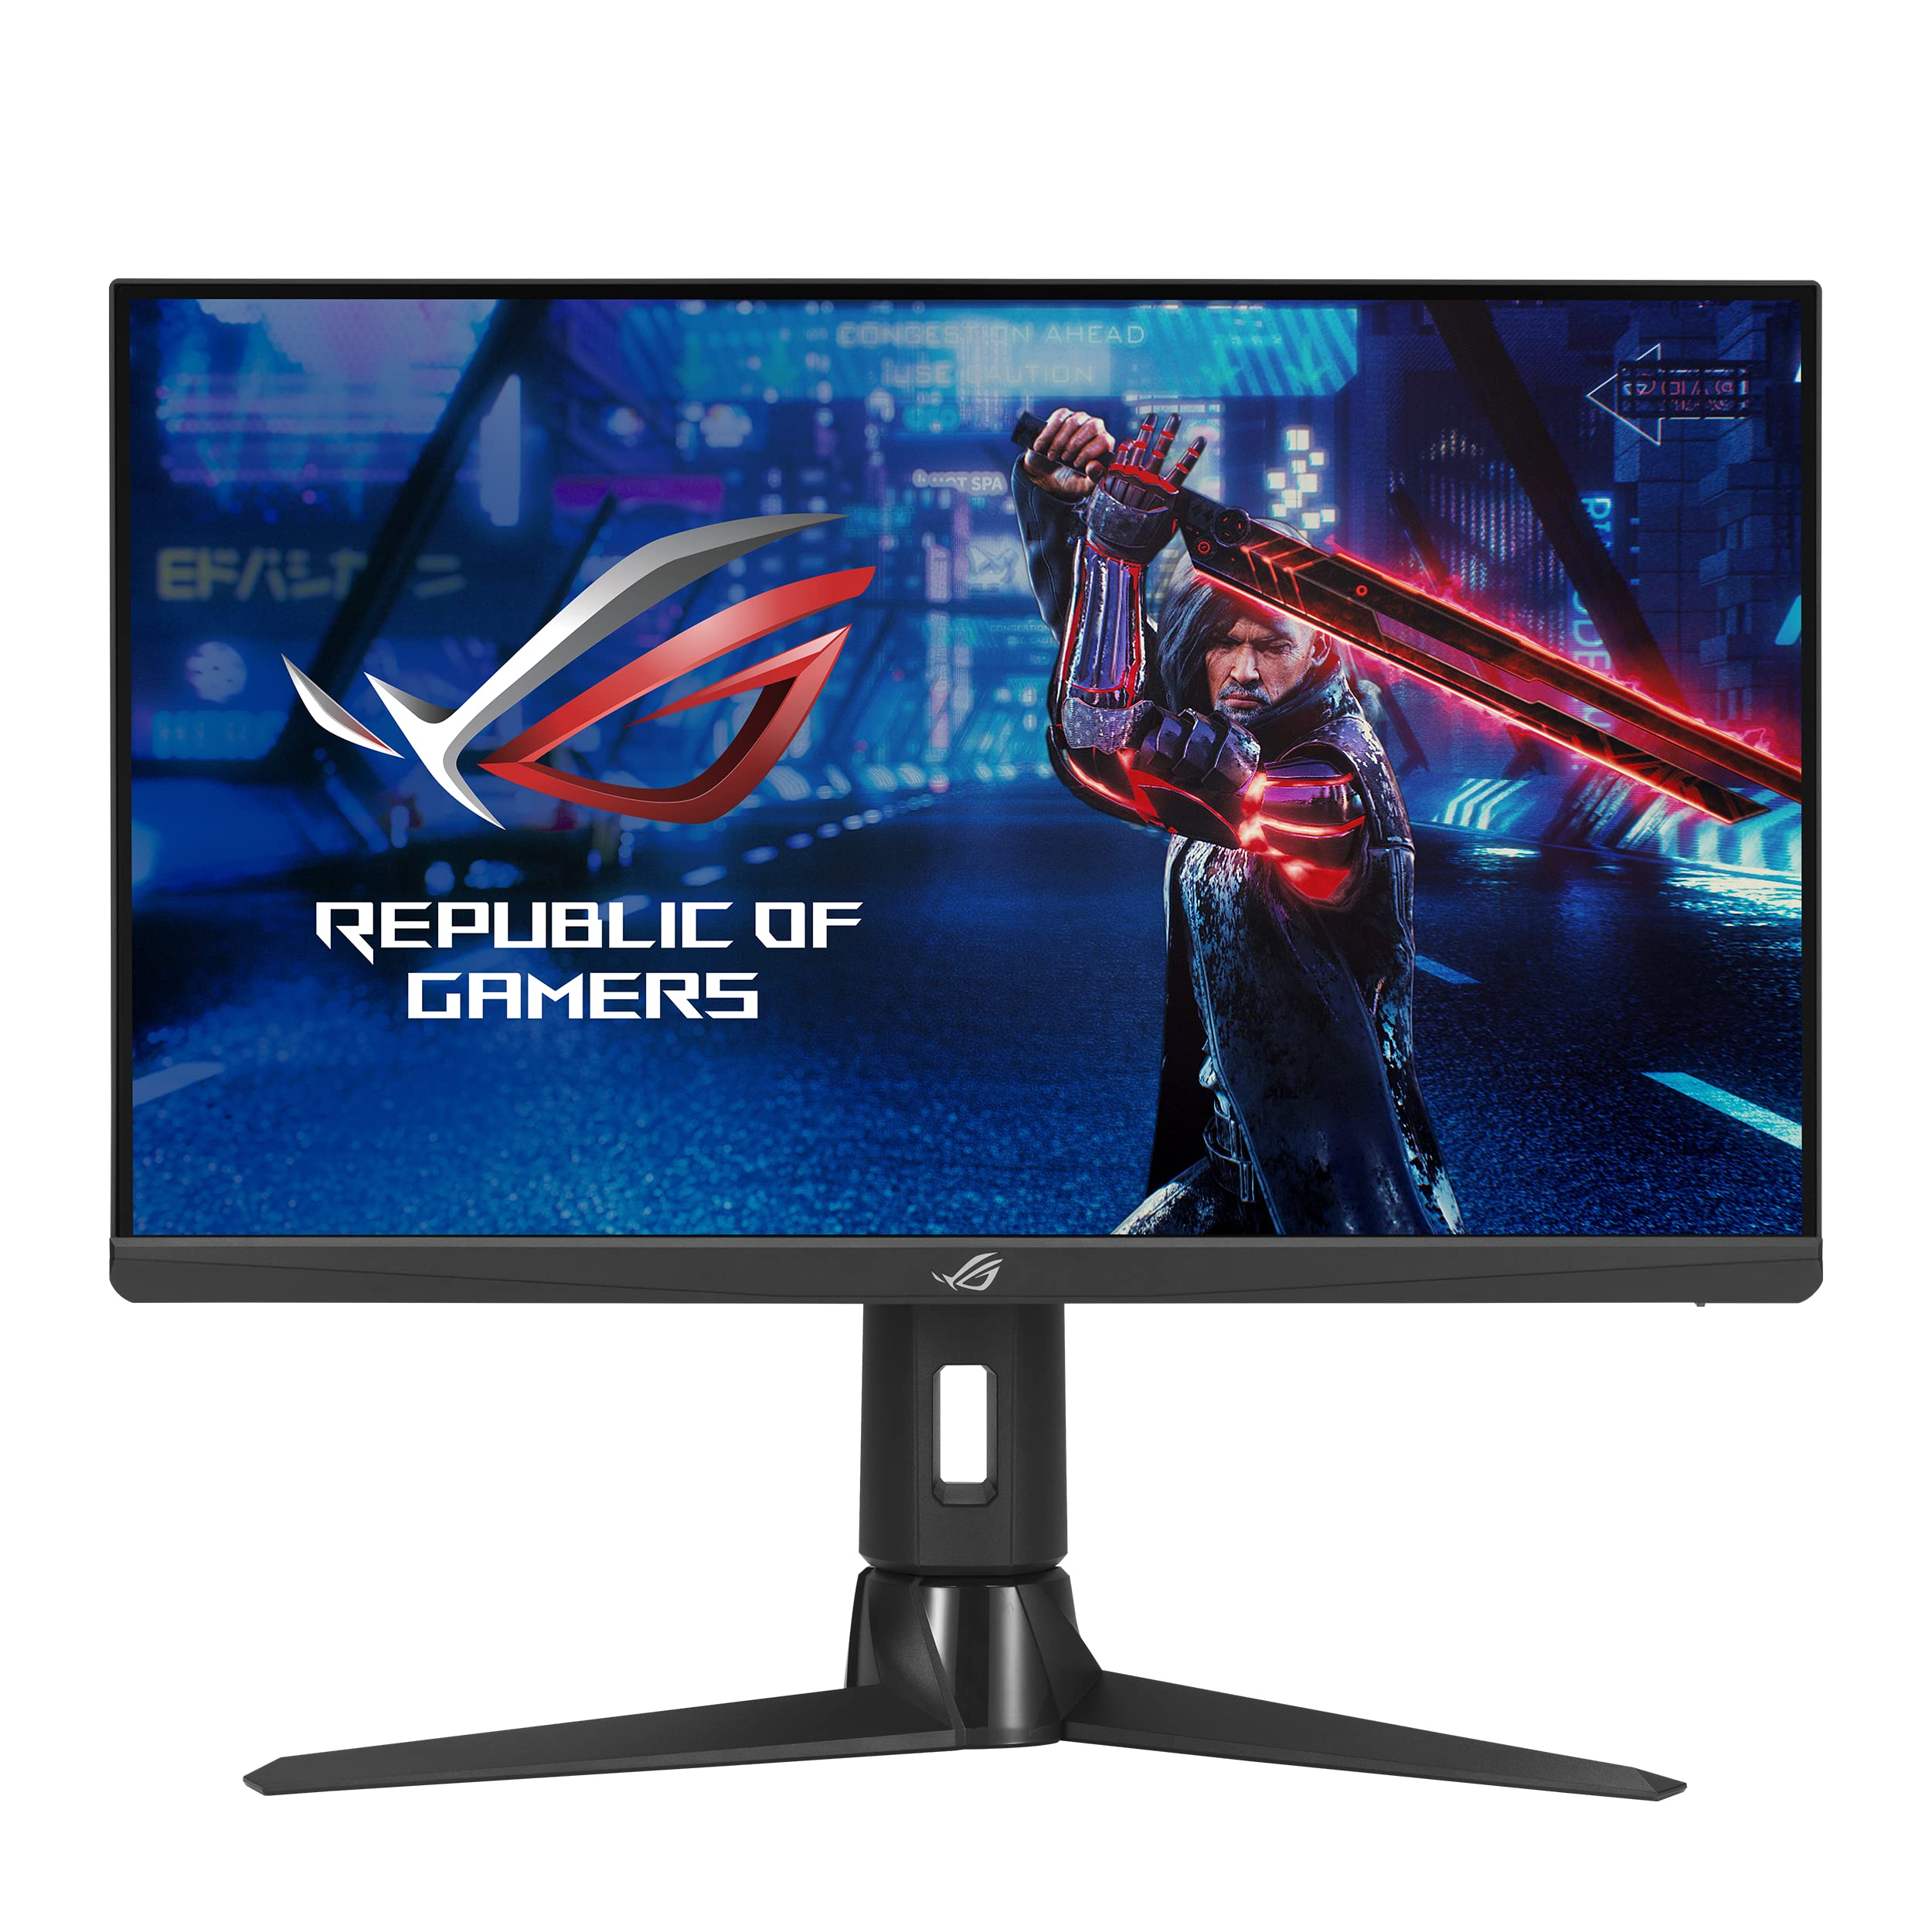  Asus ROG Strix 24.5” 1080P HDR Gaming-Monitor (XG259CM) - Full HD, Fast IPS, 240Hz, 1ms, Extreme Low Motion Blur Sync, G-Sync Compatible-KVM-Support, Tripod Socket for Webcam, USB Type-C, DisplayPort...